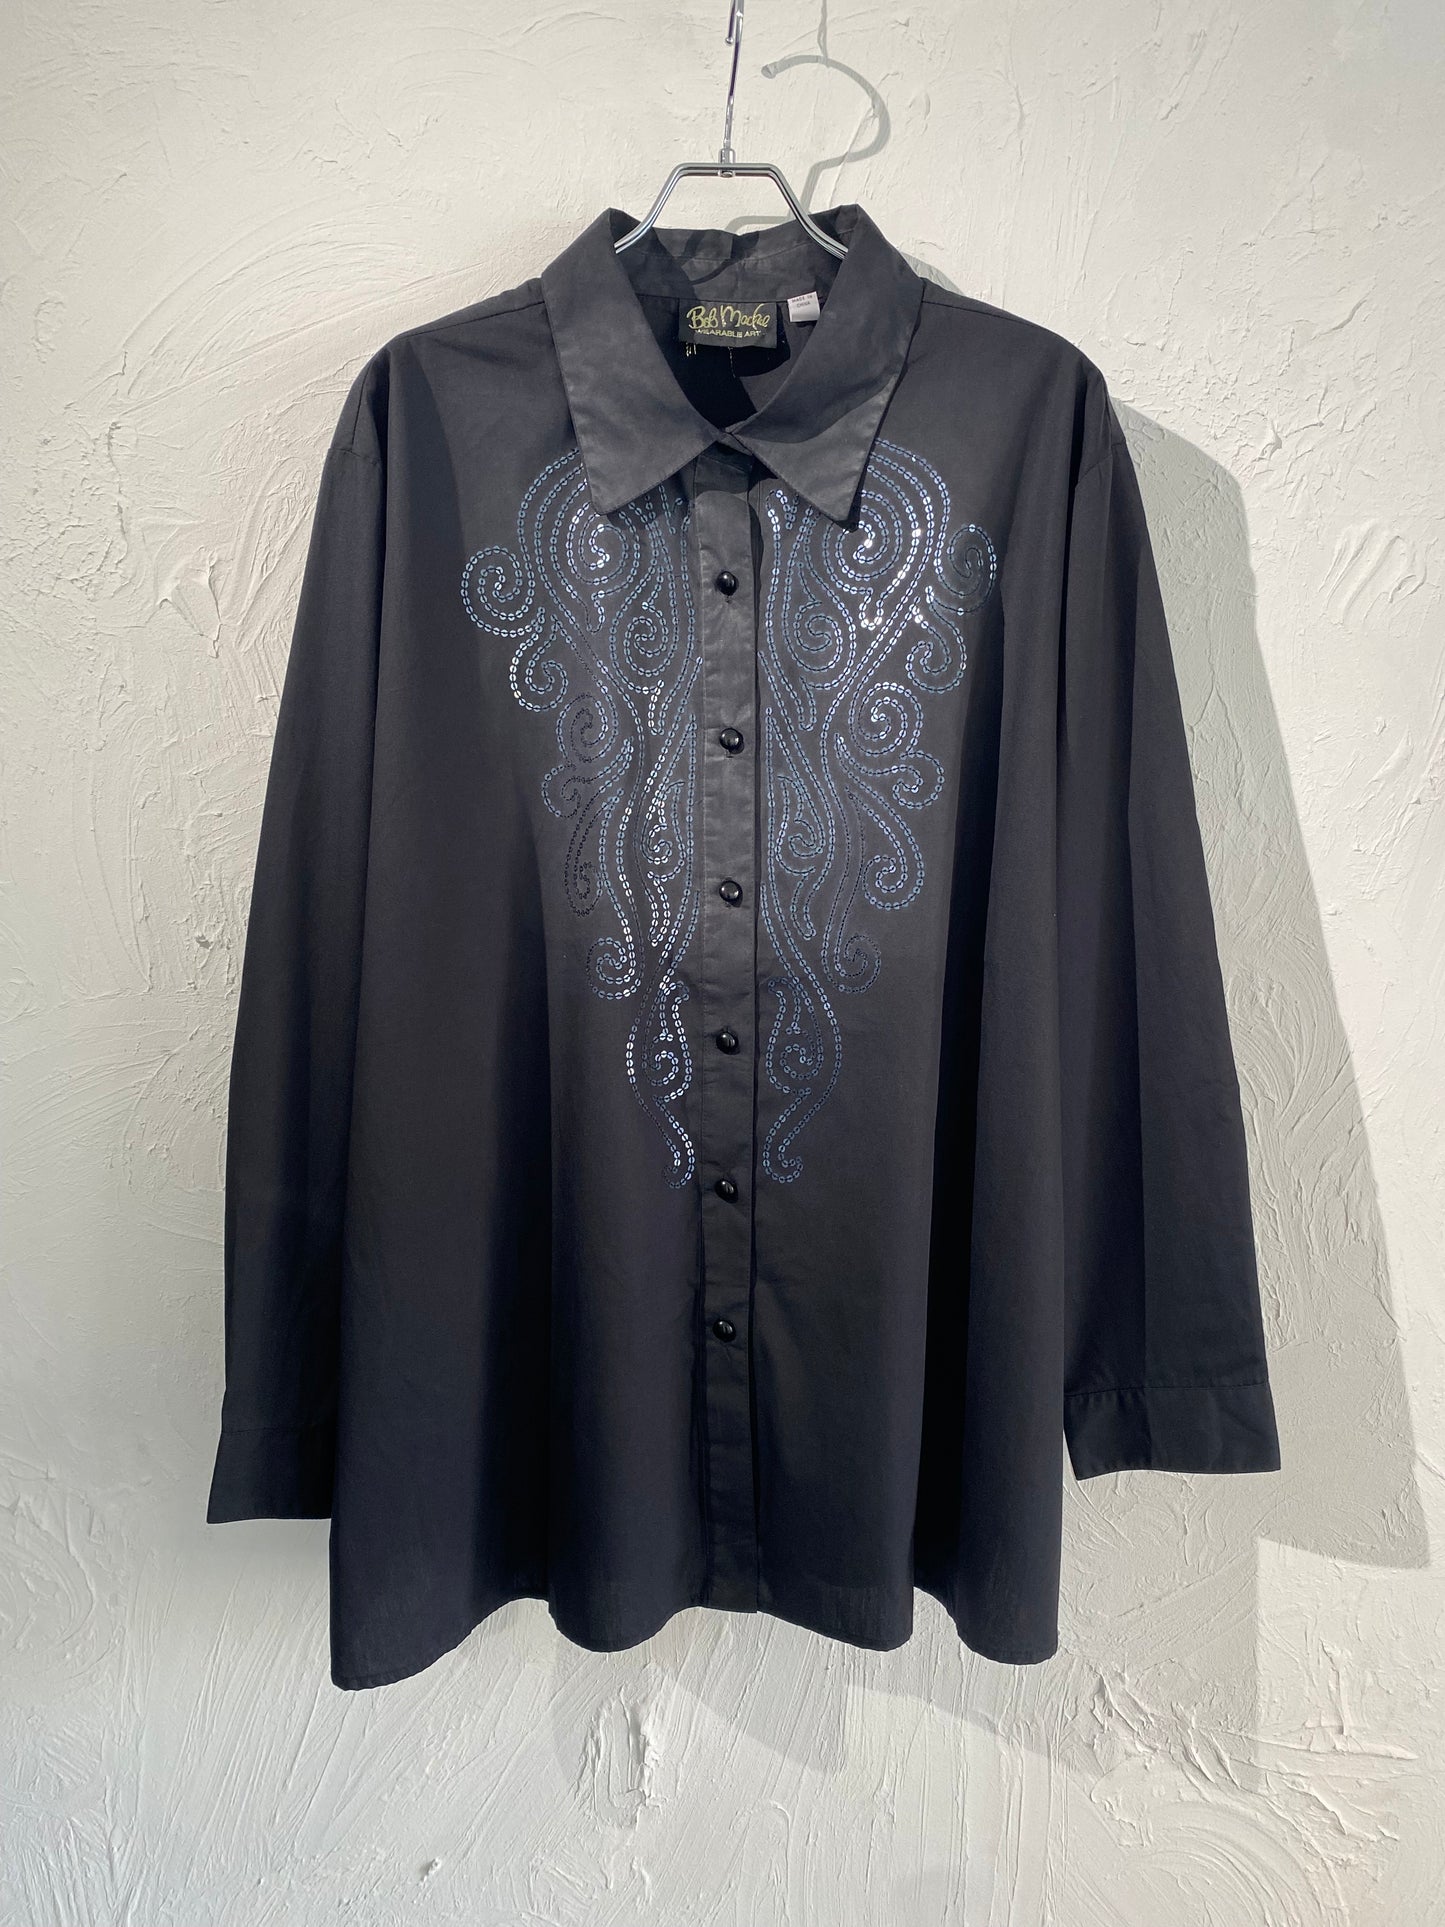 00s Bob Mackie sequins embroidery oversize shirt